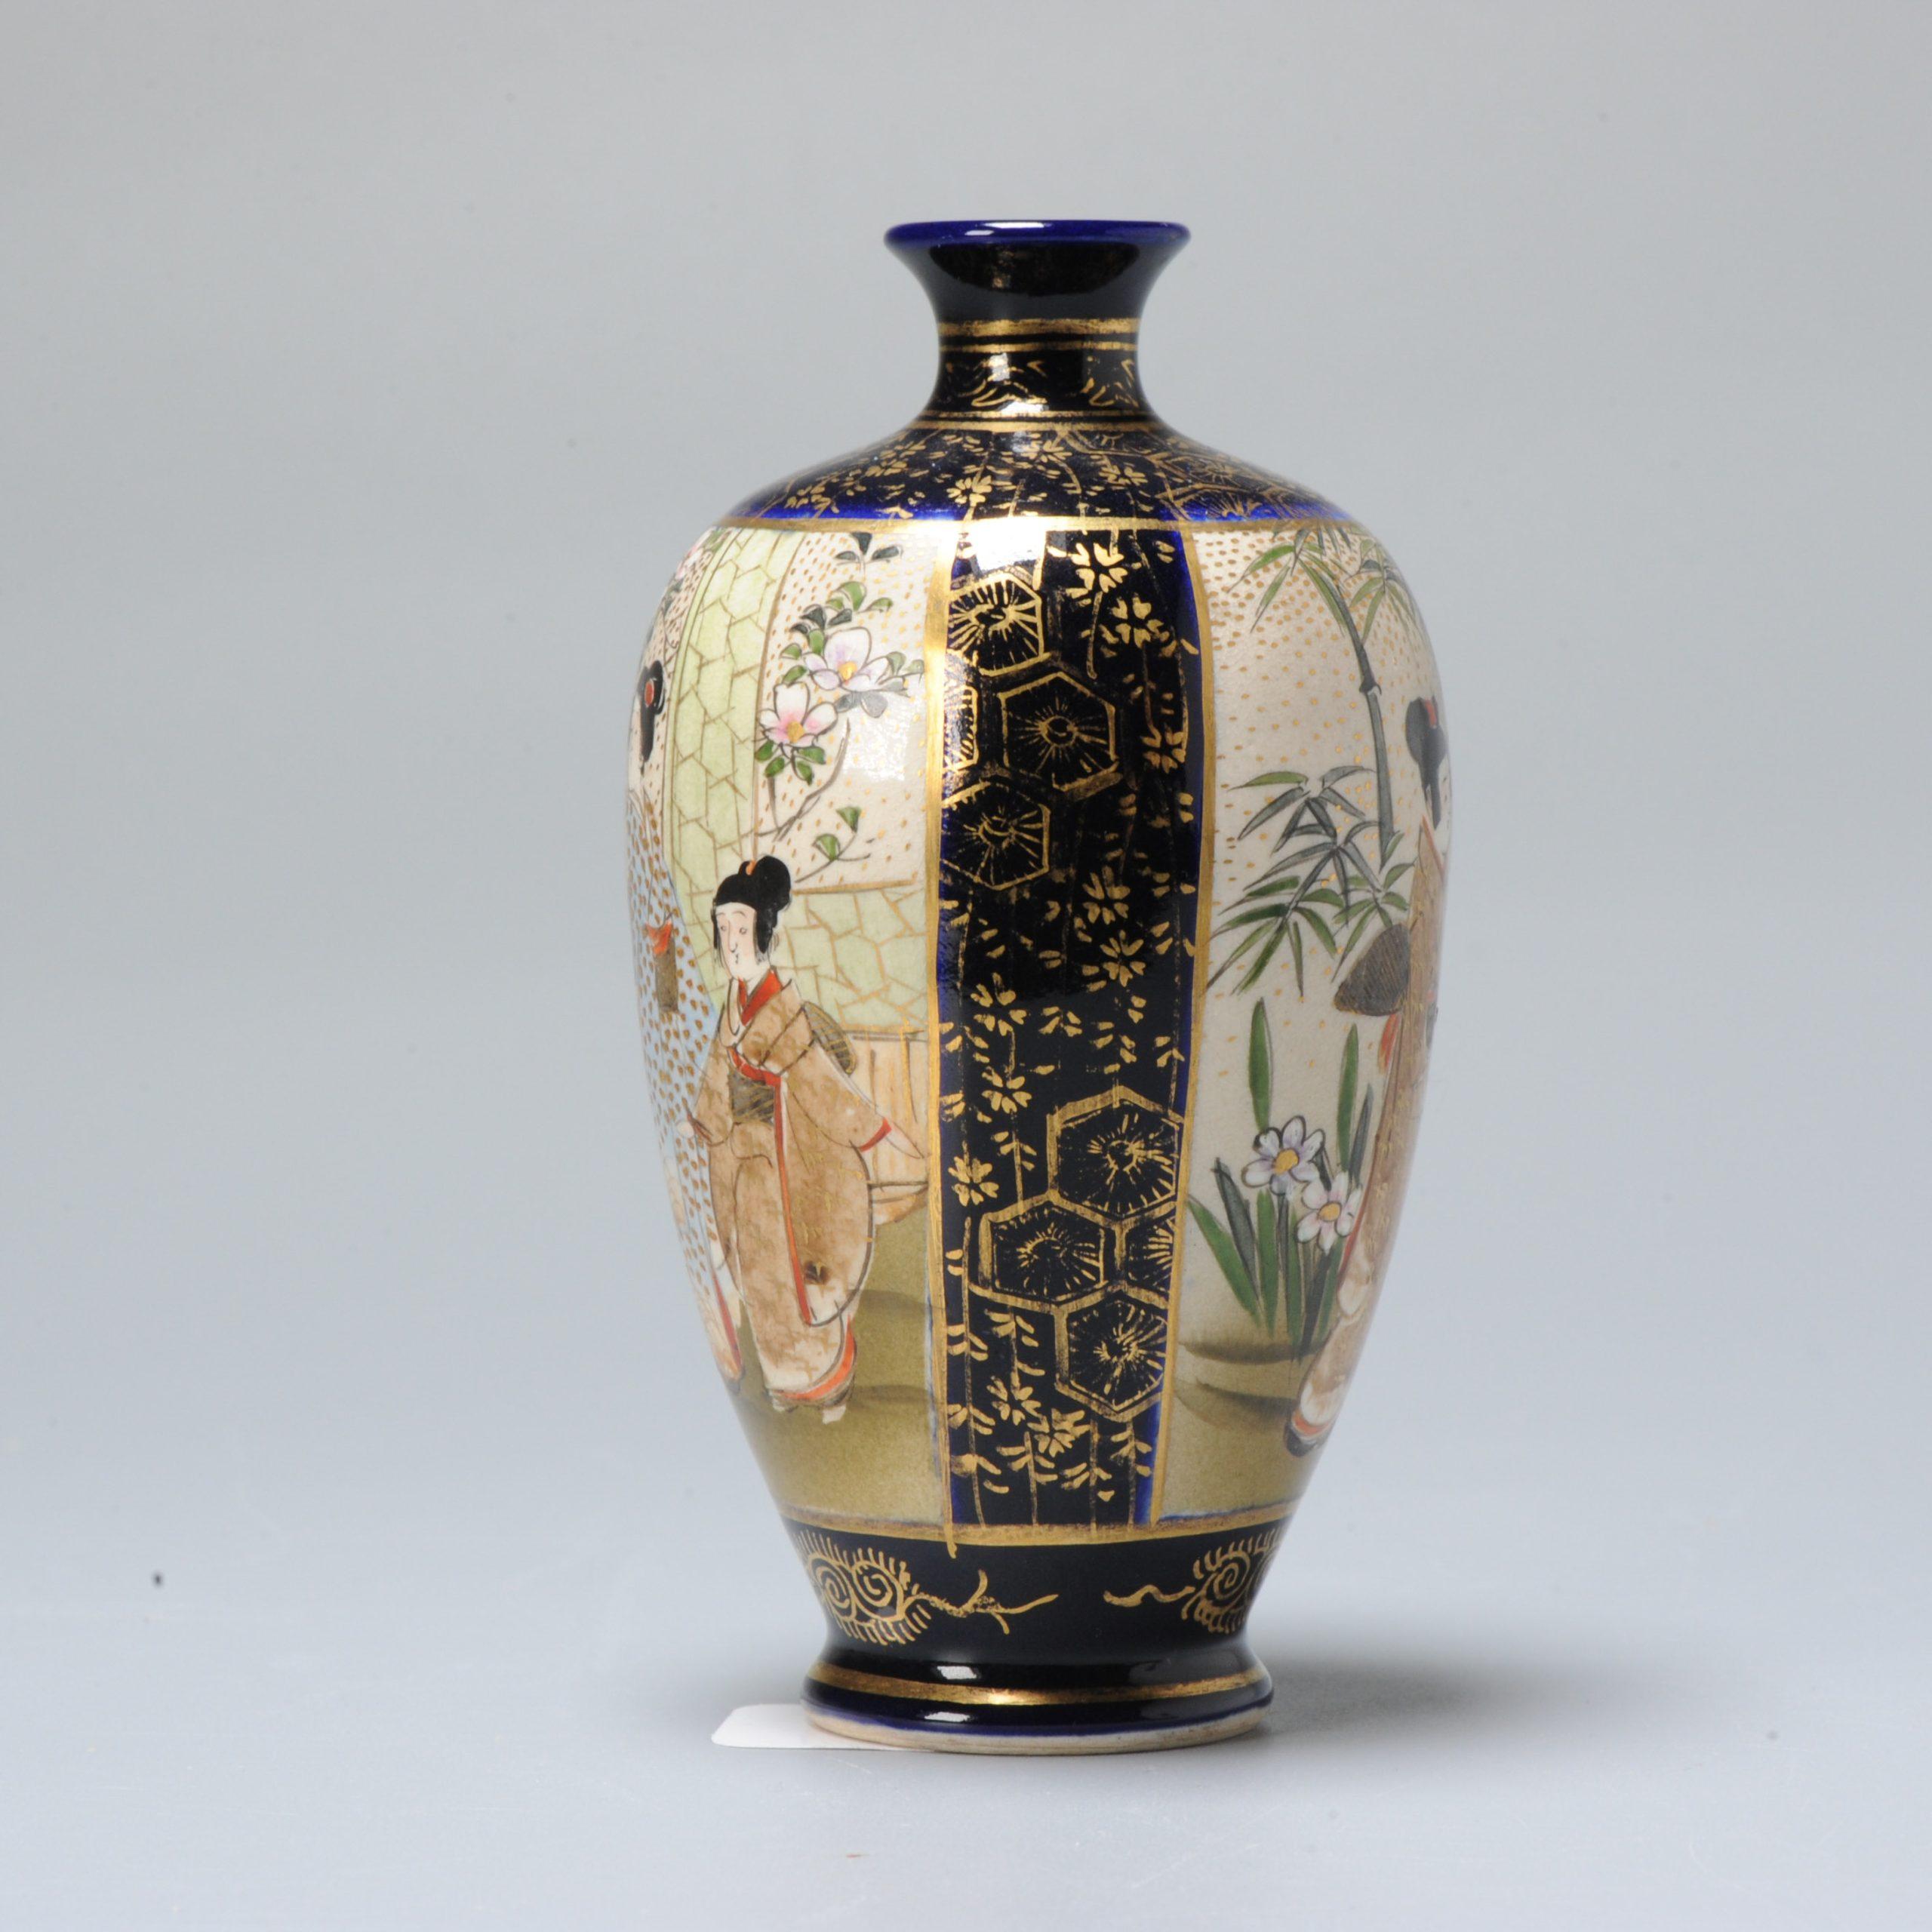 Fabulous and small japanese earthenware Satsuma vase of great shape and scene.

Marked: Cannot decipher.

Additional information:
Material: Porcelain & Pottery
Type: Vase
Region of Origin: Japan
Japanese Style: Satsum
Period: 19th century, 20th